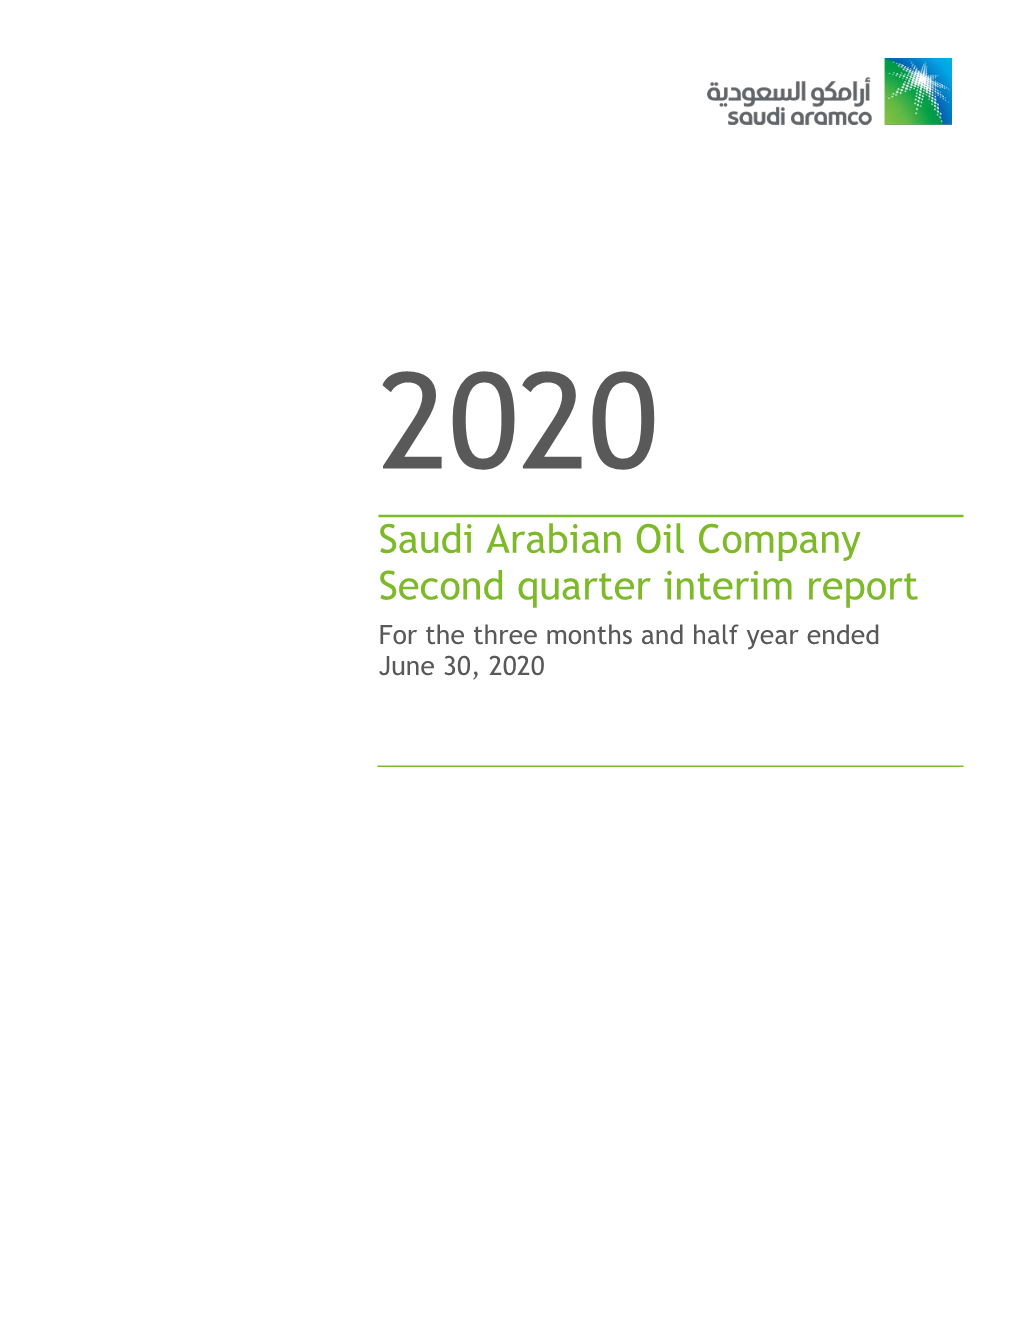 Saudi Arabian Oil Company Second Quarter Interim Report for the Three Months and Half Year Ended June 30, 2020